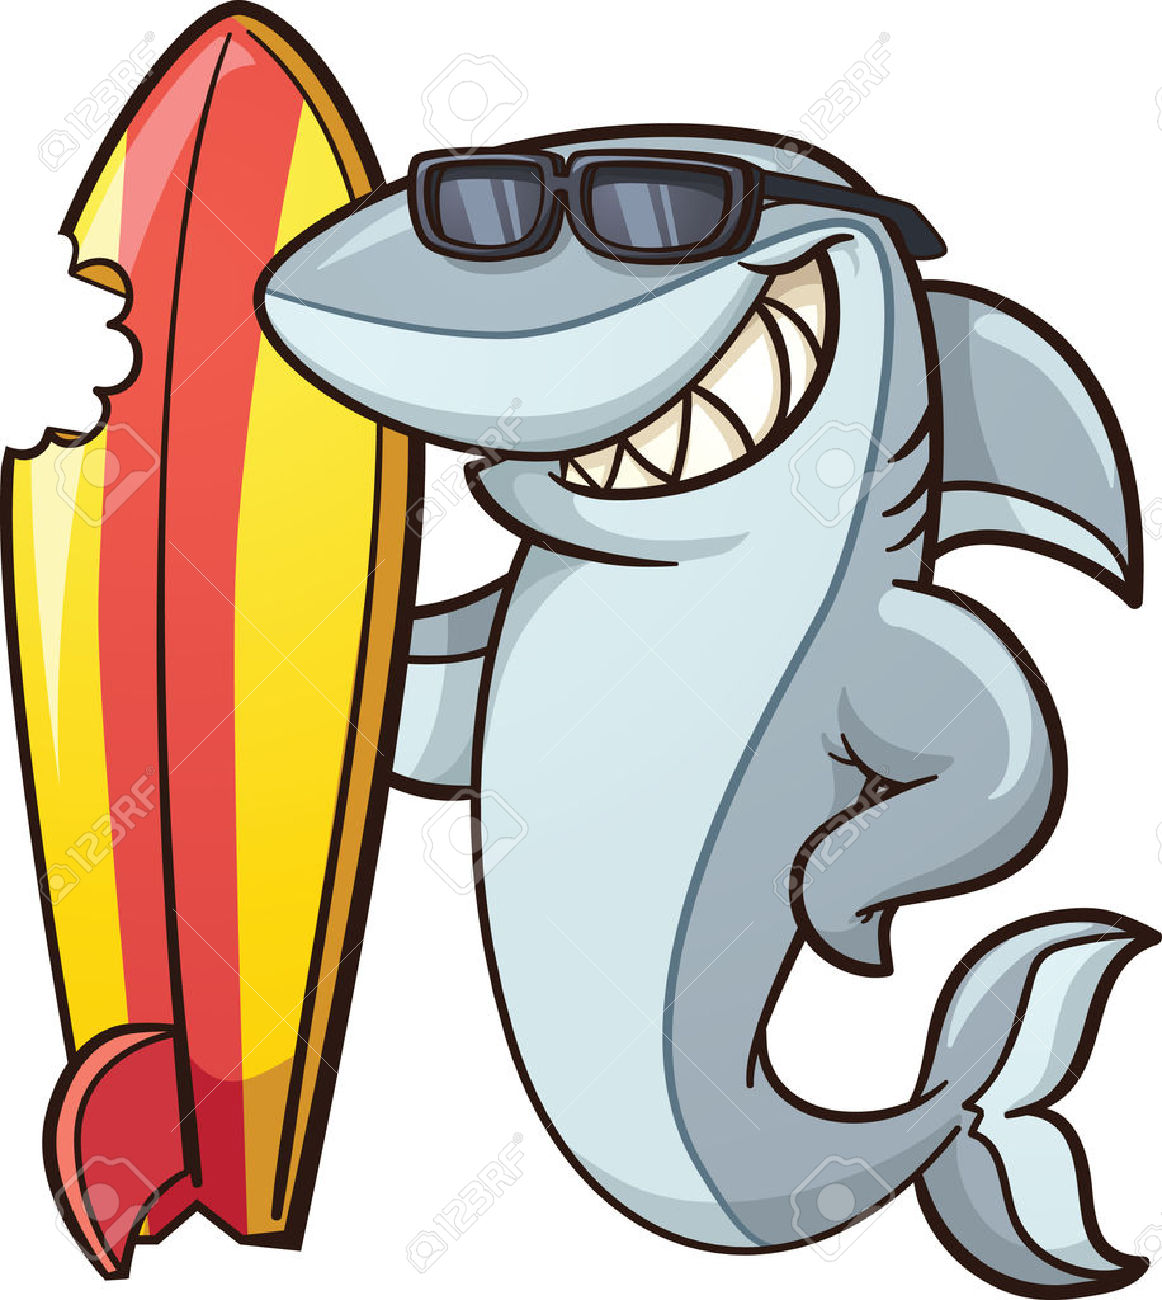 Free Animated Shark Cliparts, Download Free Clip Art, Free ...